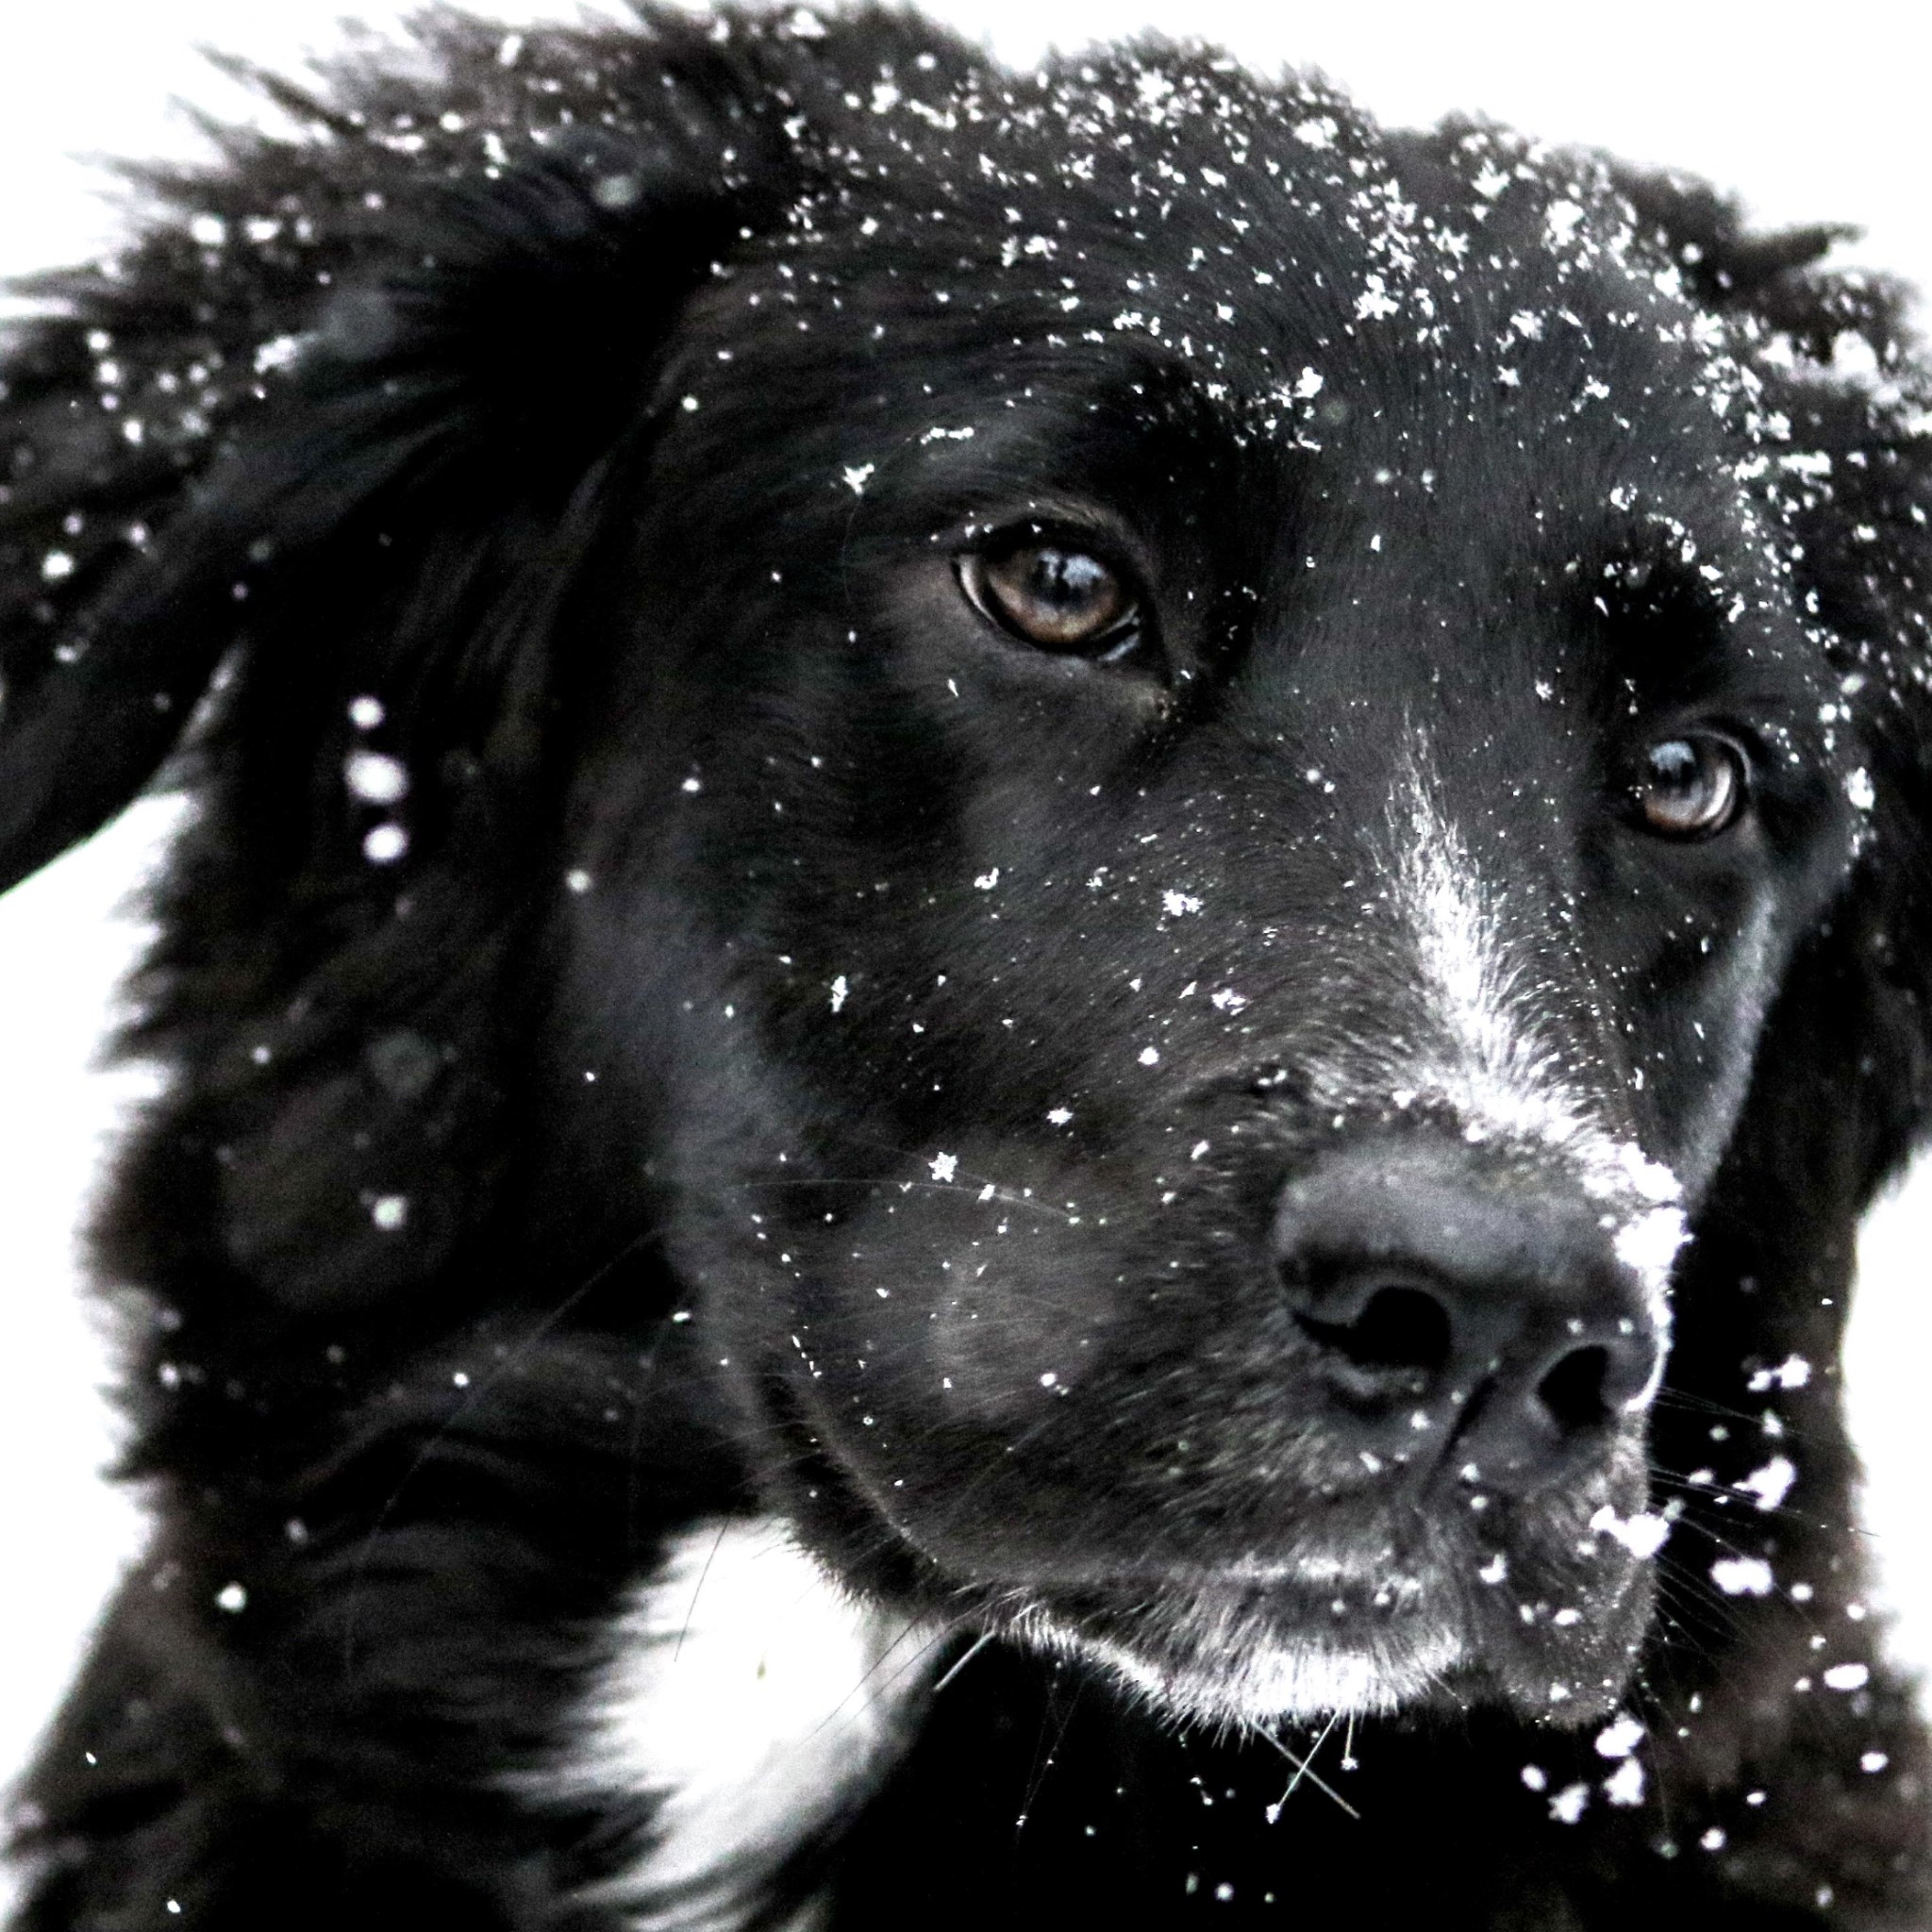 Snowing over the cute dog wallpaper 2048x2048